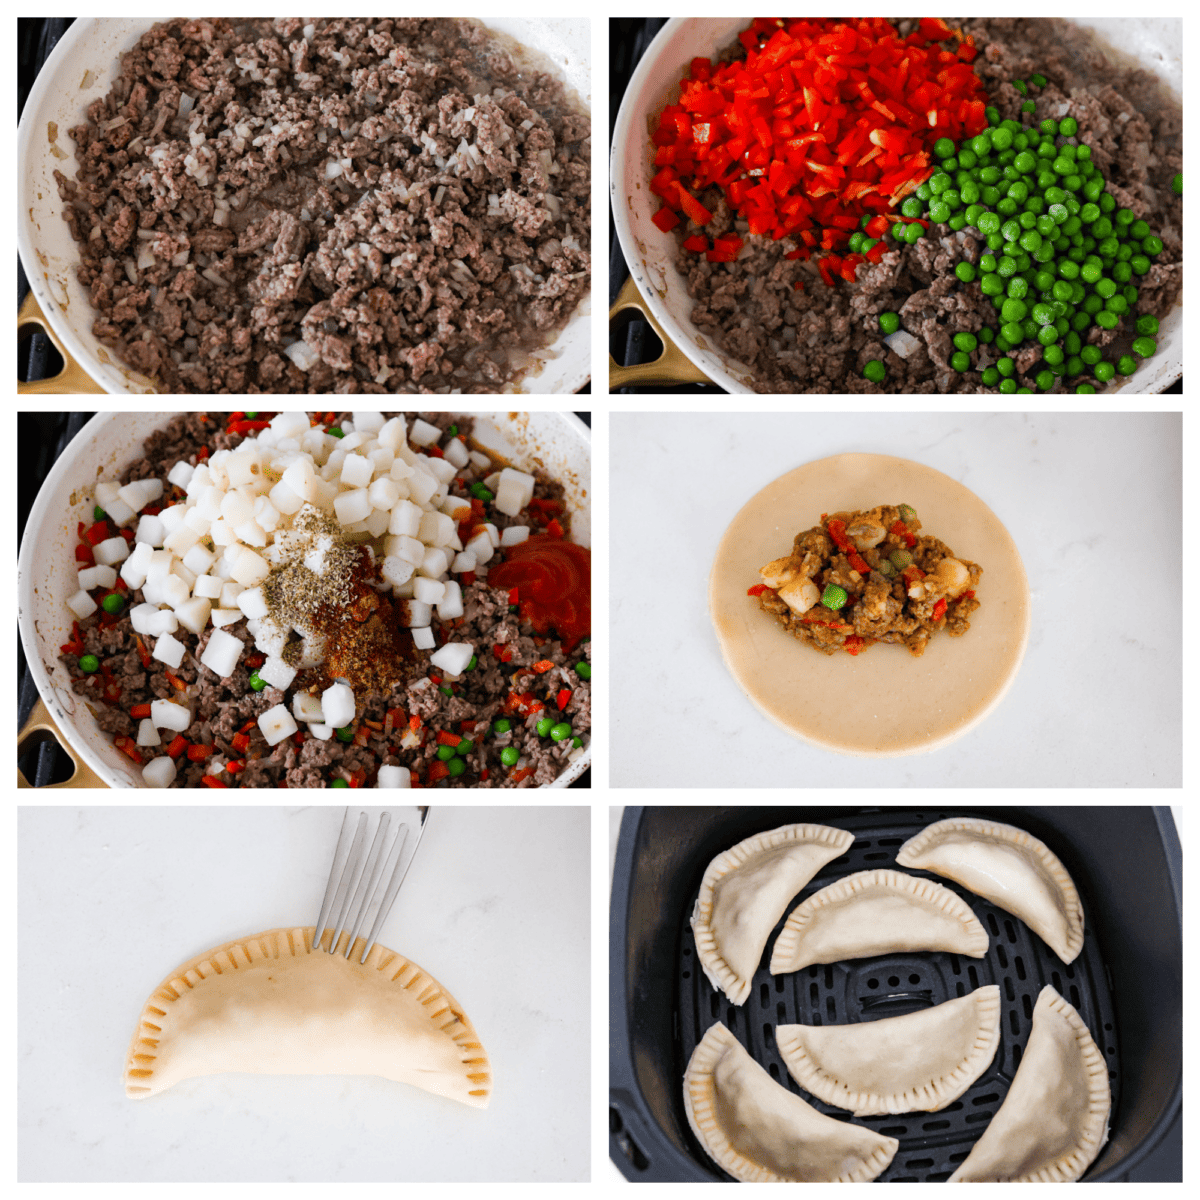 6-photo collage of the empanadas being assembled.